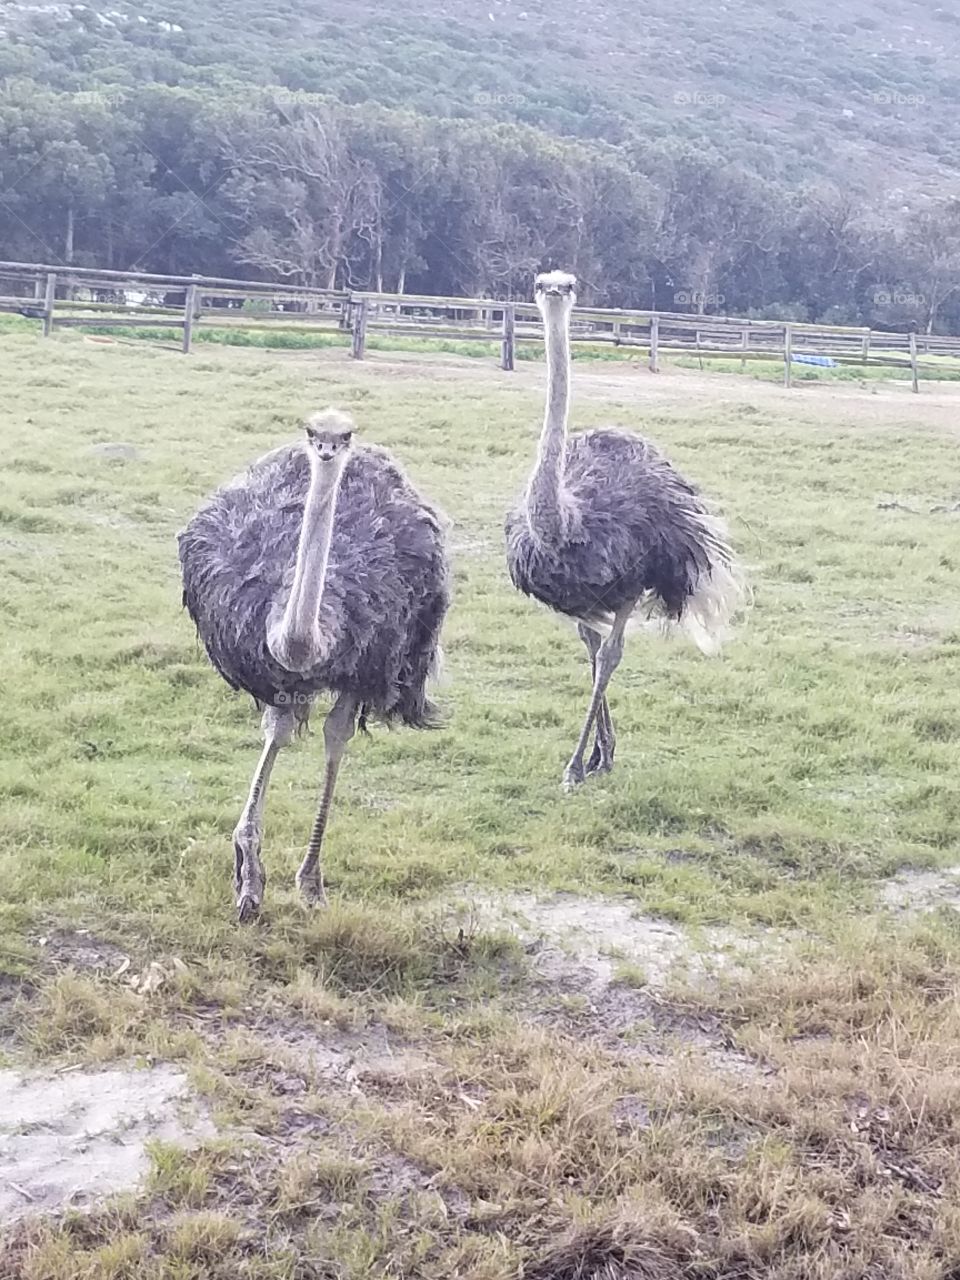 Ostriches, coming for you